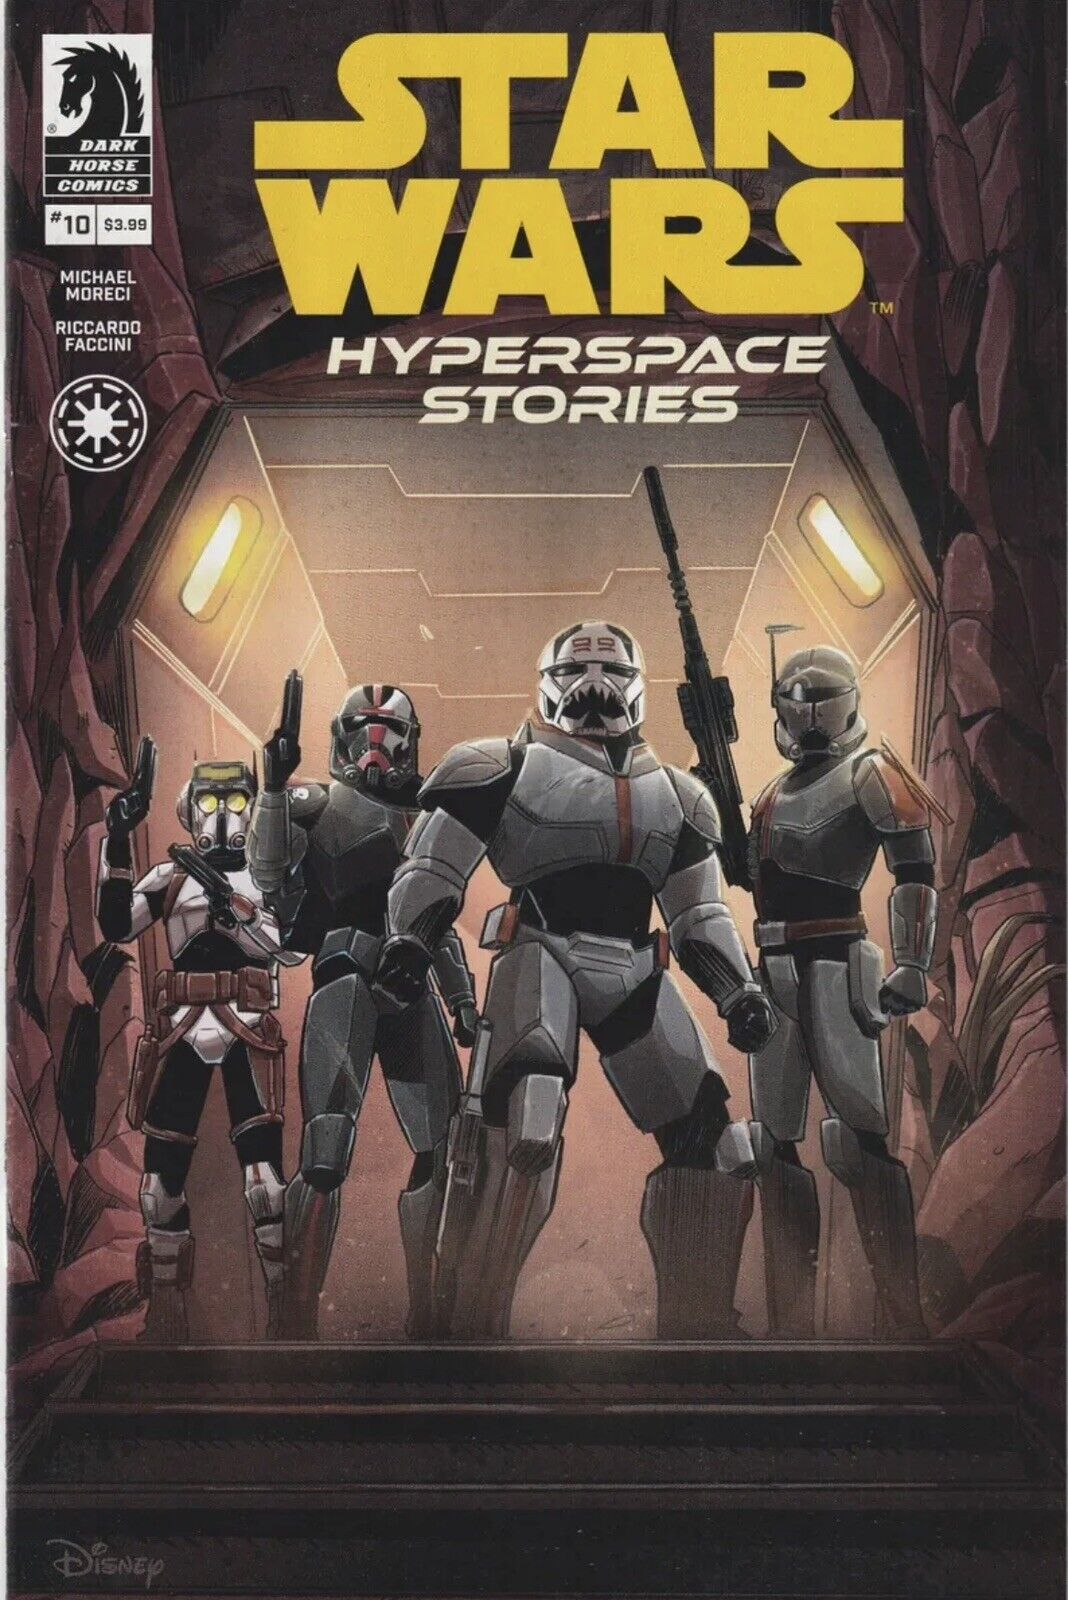 Star Wars Hyperspace Stories #10 1st Appearance Bad Batch Cover Disney Marvel